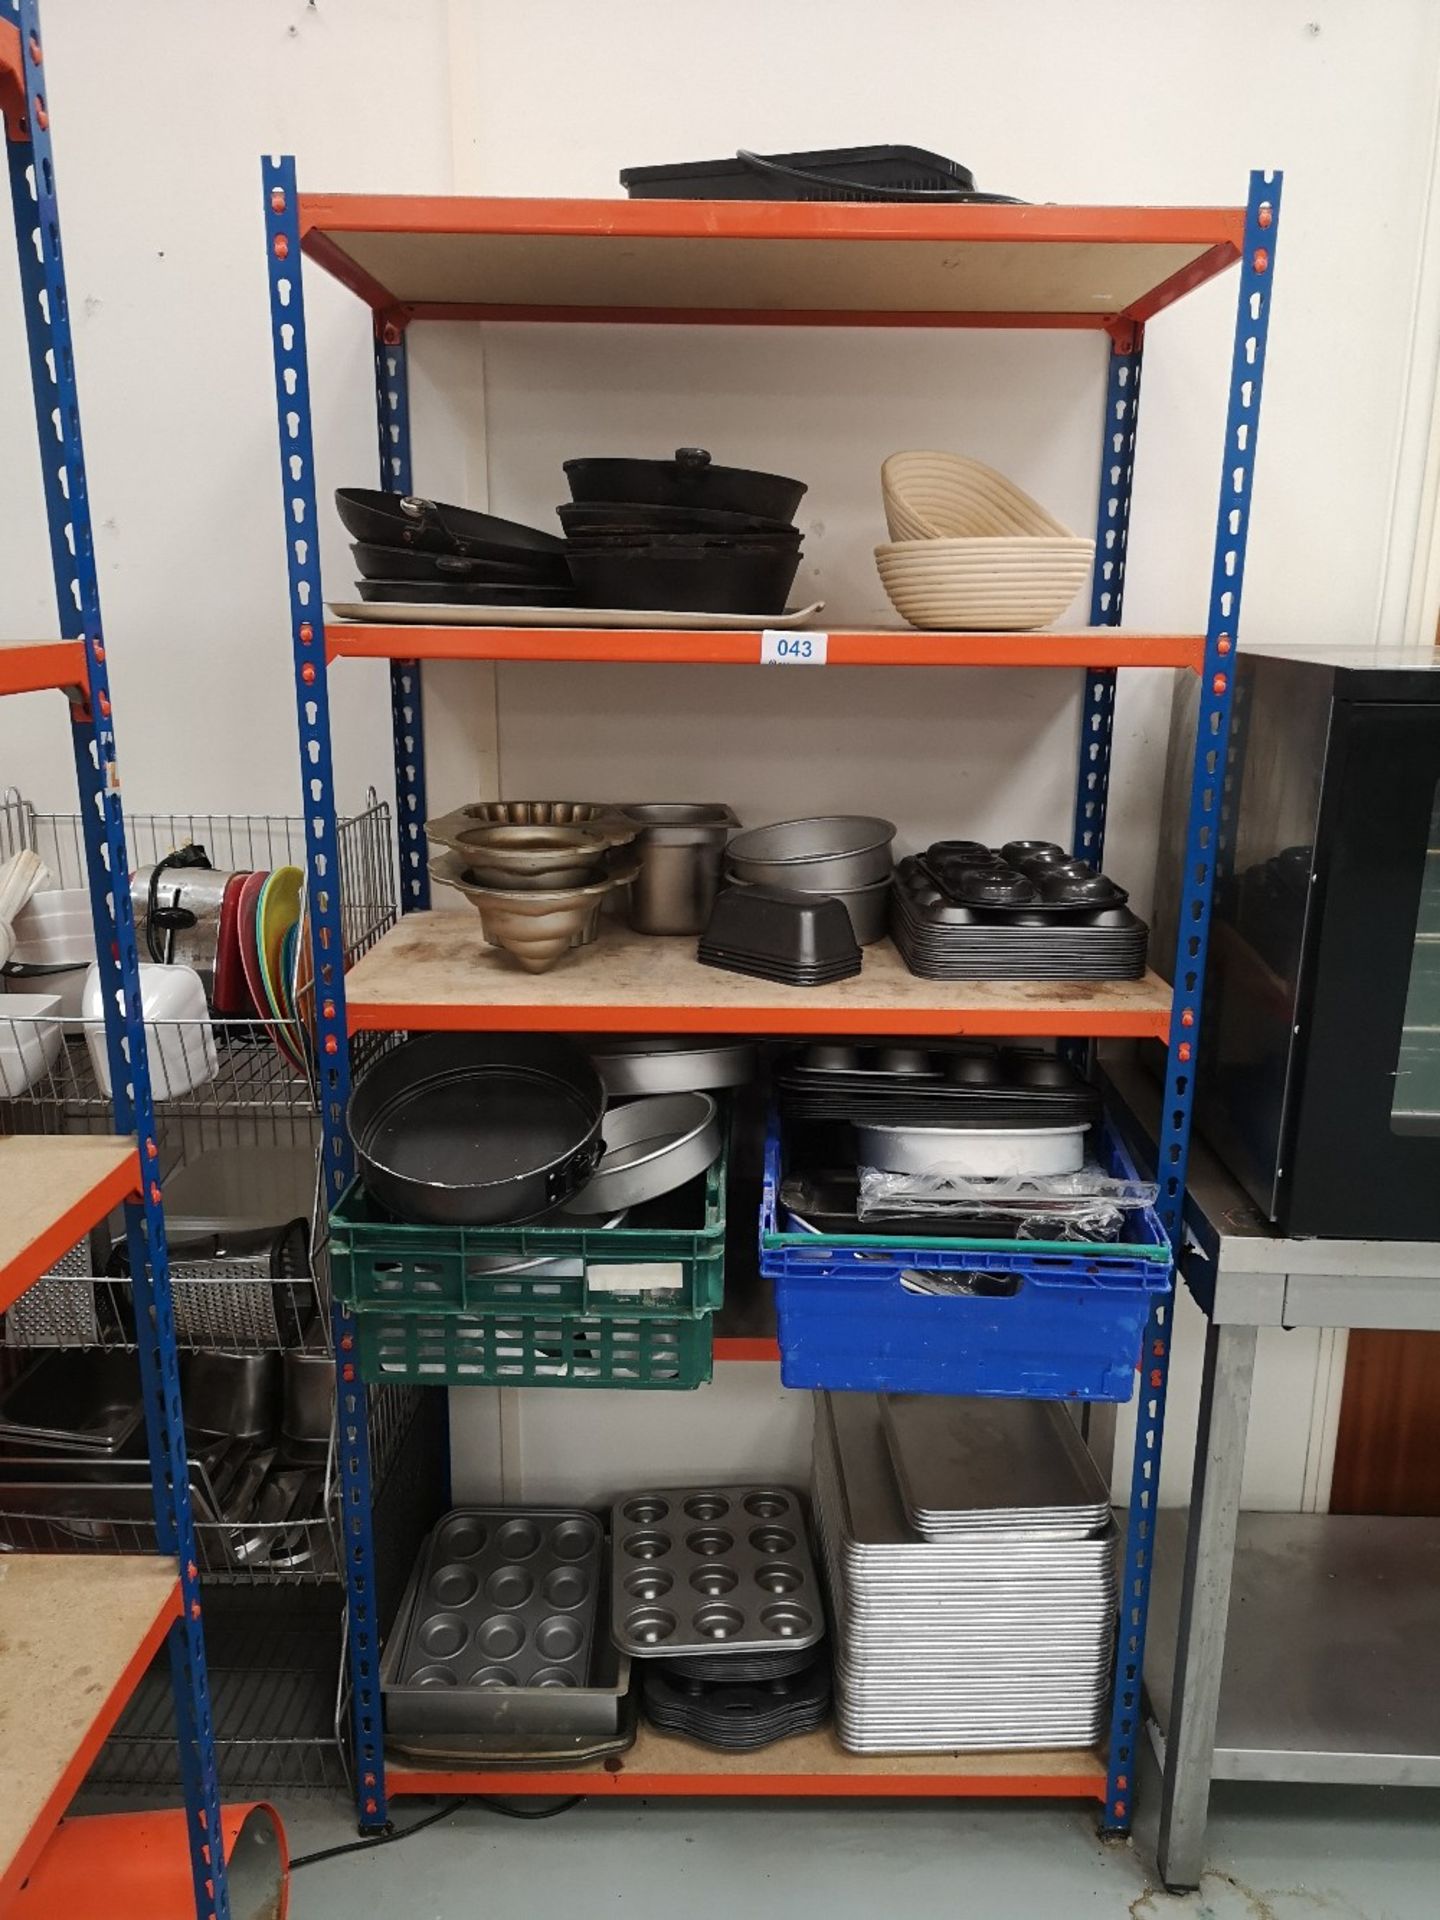 (3) Bays of Five Tier Shelving & Contents